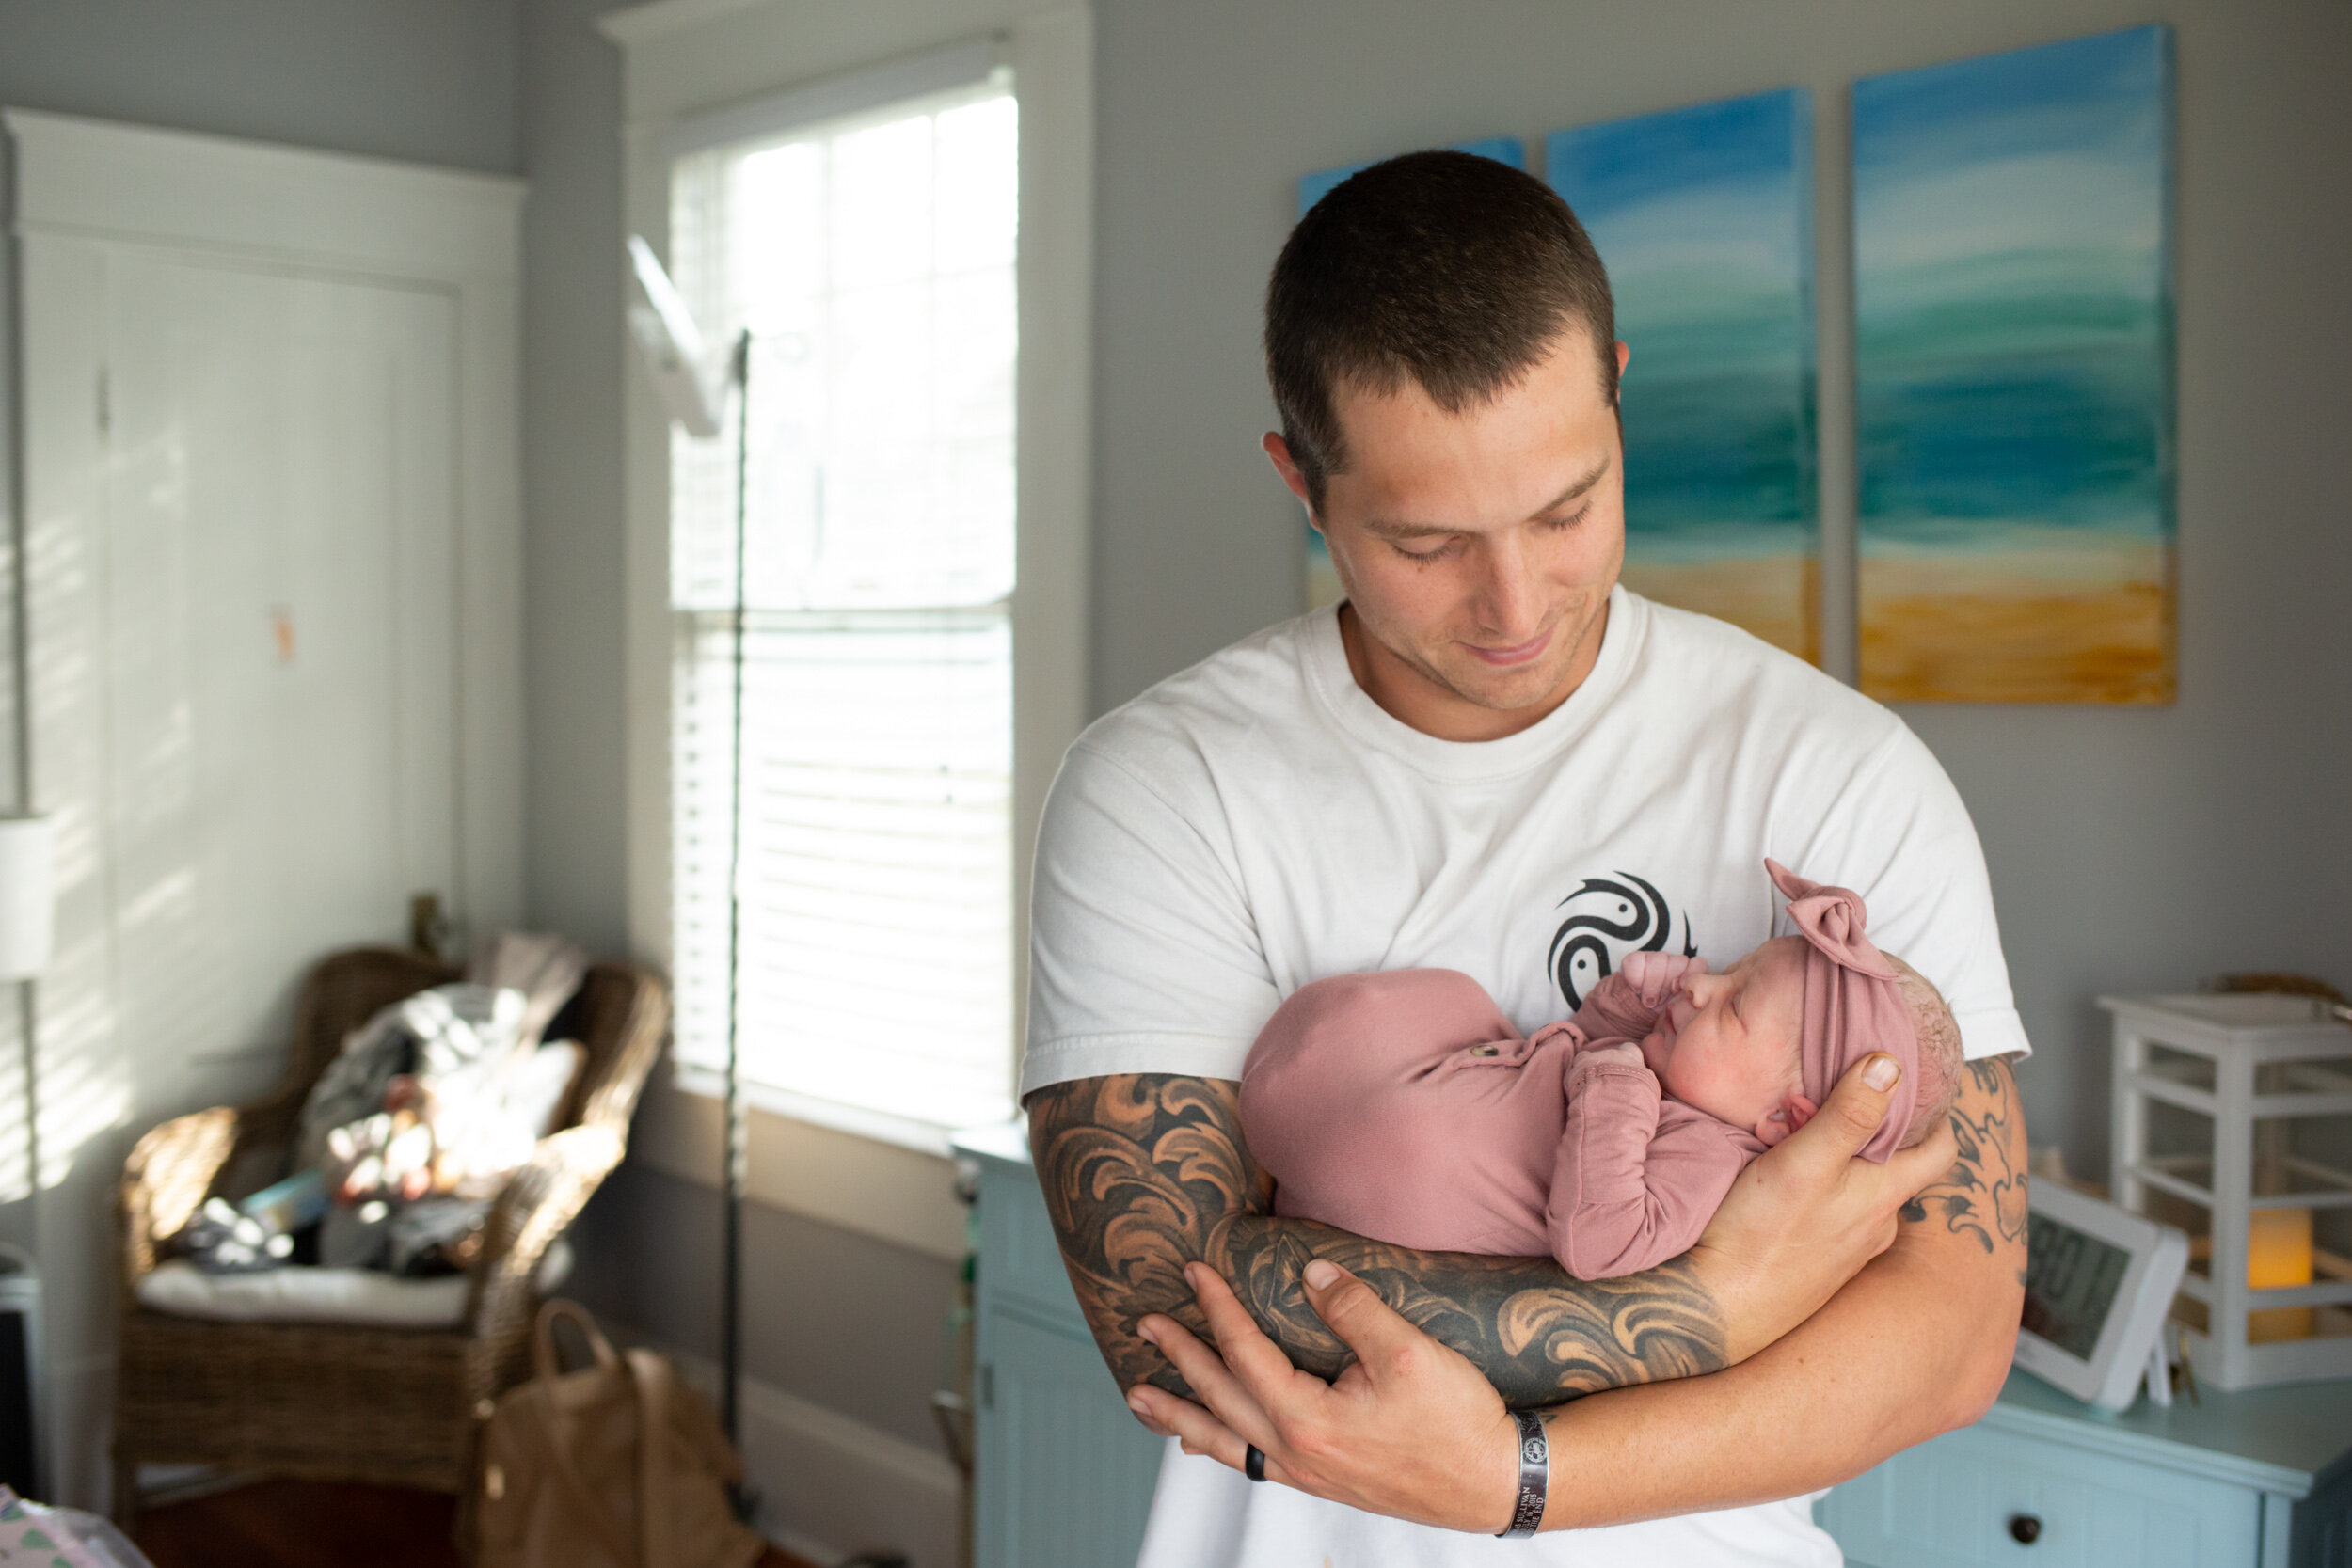 Jacksonville dad holding his baby girl